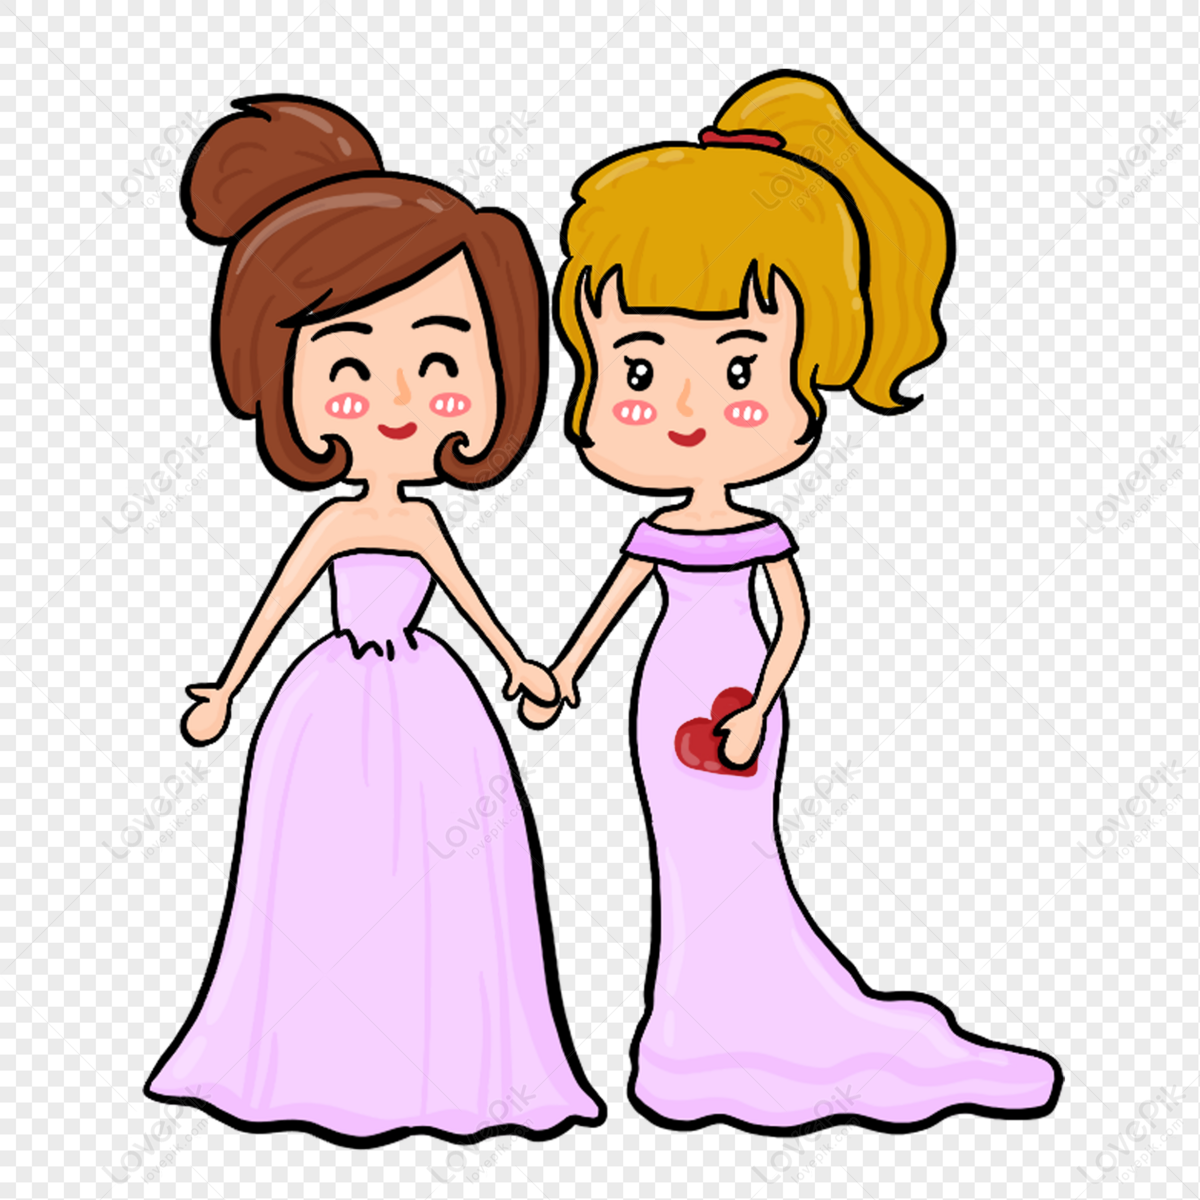 Girls Who Are Married On The Same Sex Day PNG White Transparent And Clipart  Image For Free Download - Lovepik | 401280112